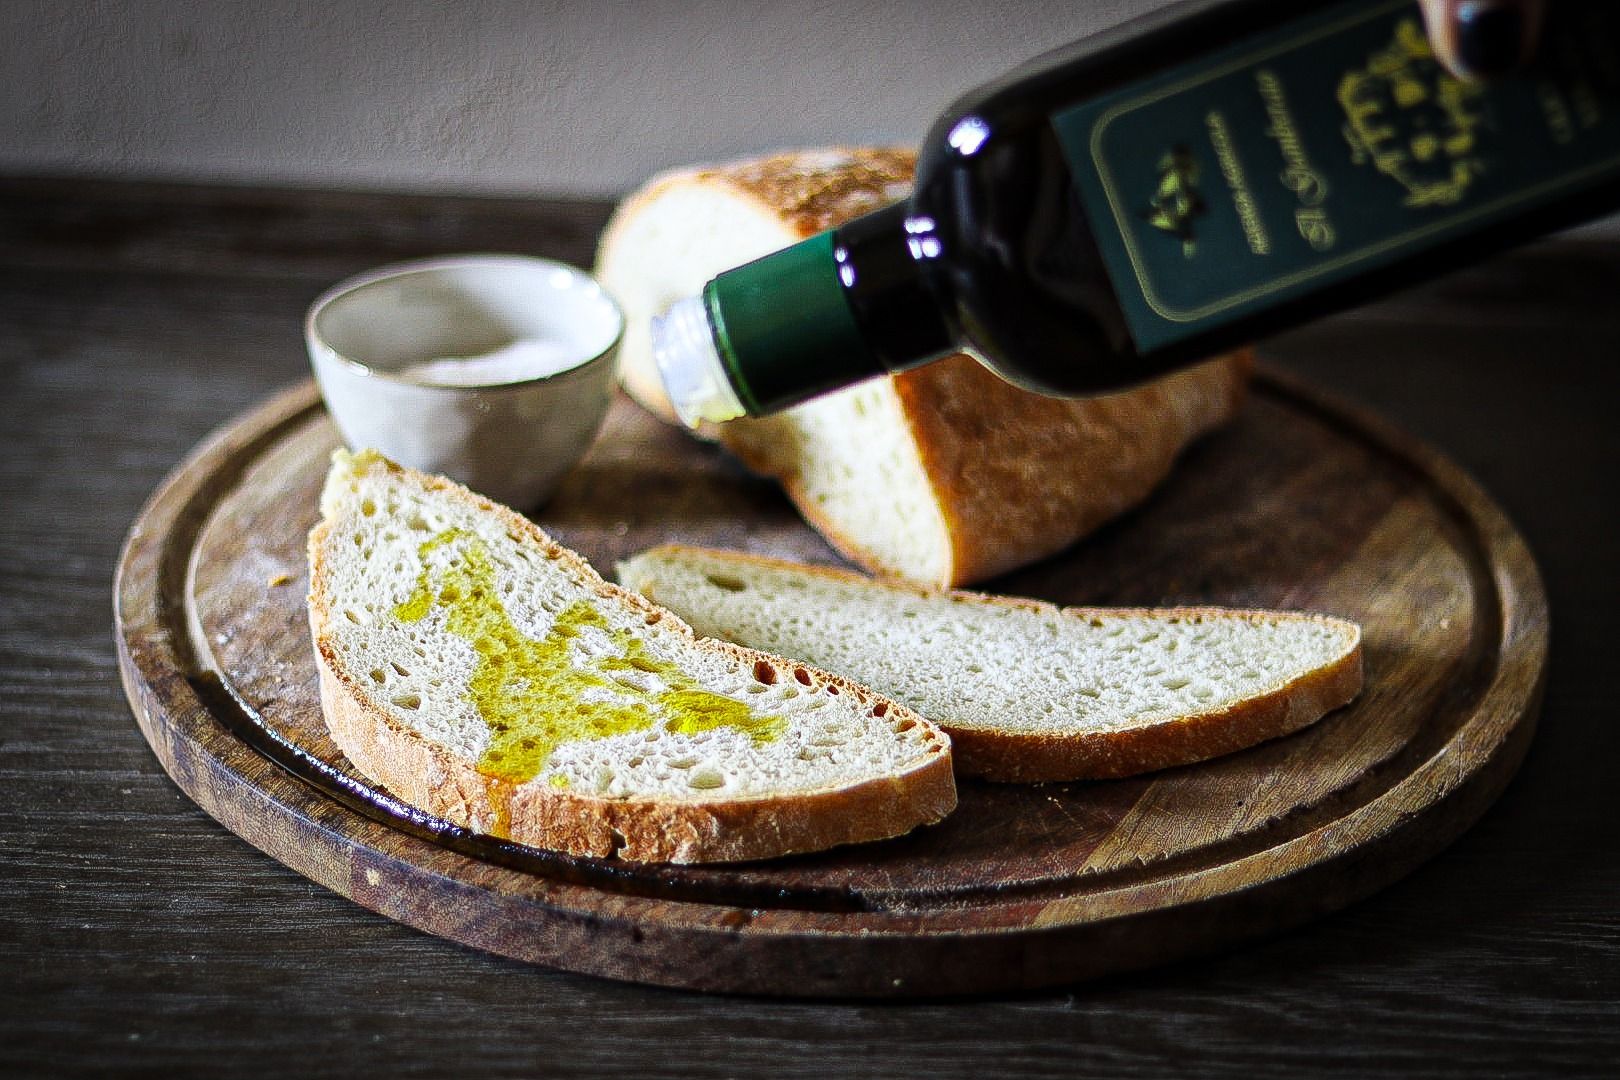 Tuscan olive oil: why is it the best?